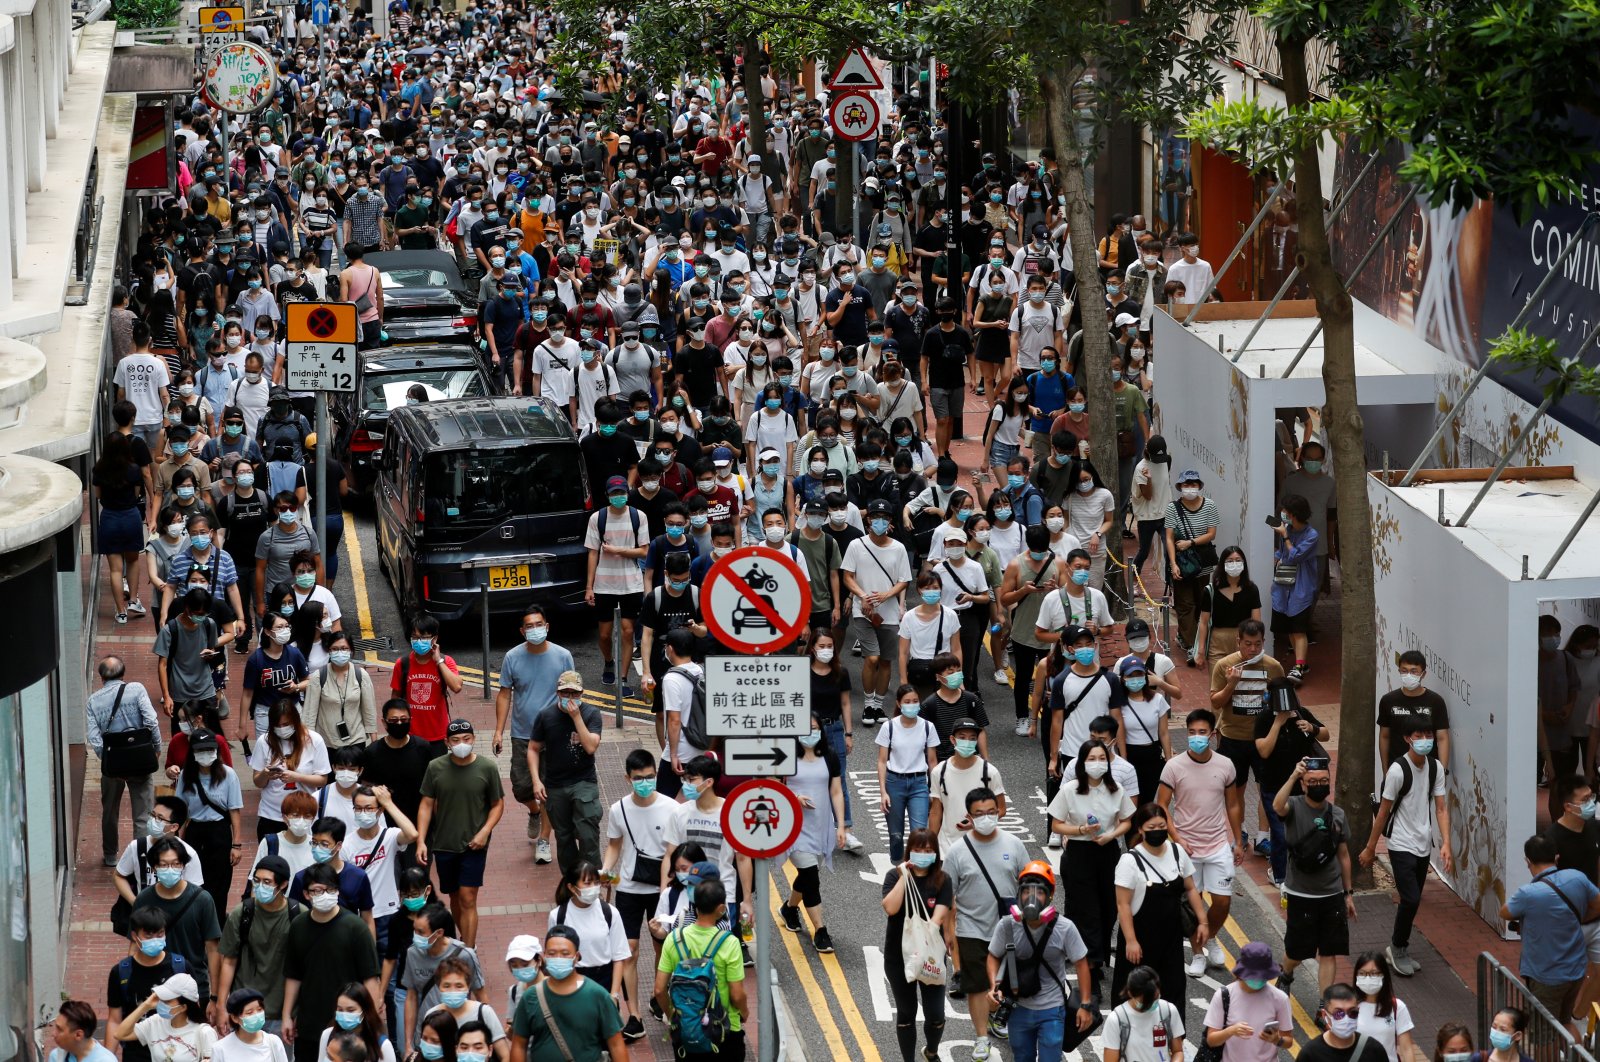 Anti-national security law protesters march at the anniversary of Hong Kong's handover to China from Britain, in Hong Kong, July 1, 2020. (REUTERS Photo)